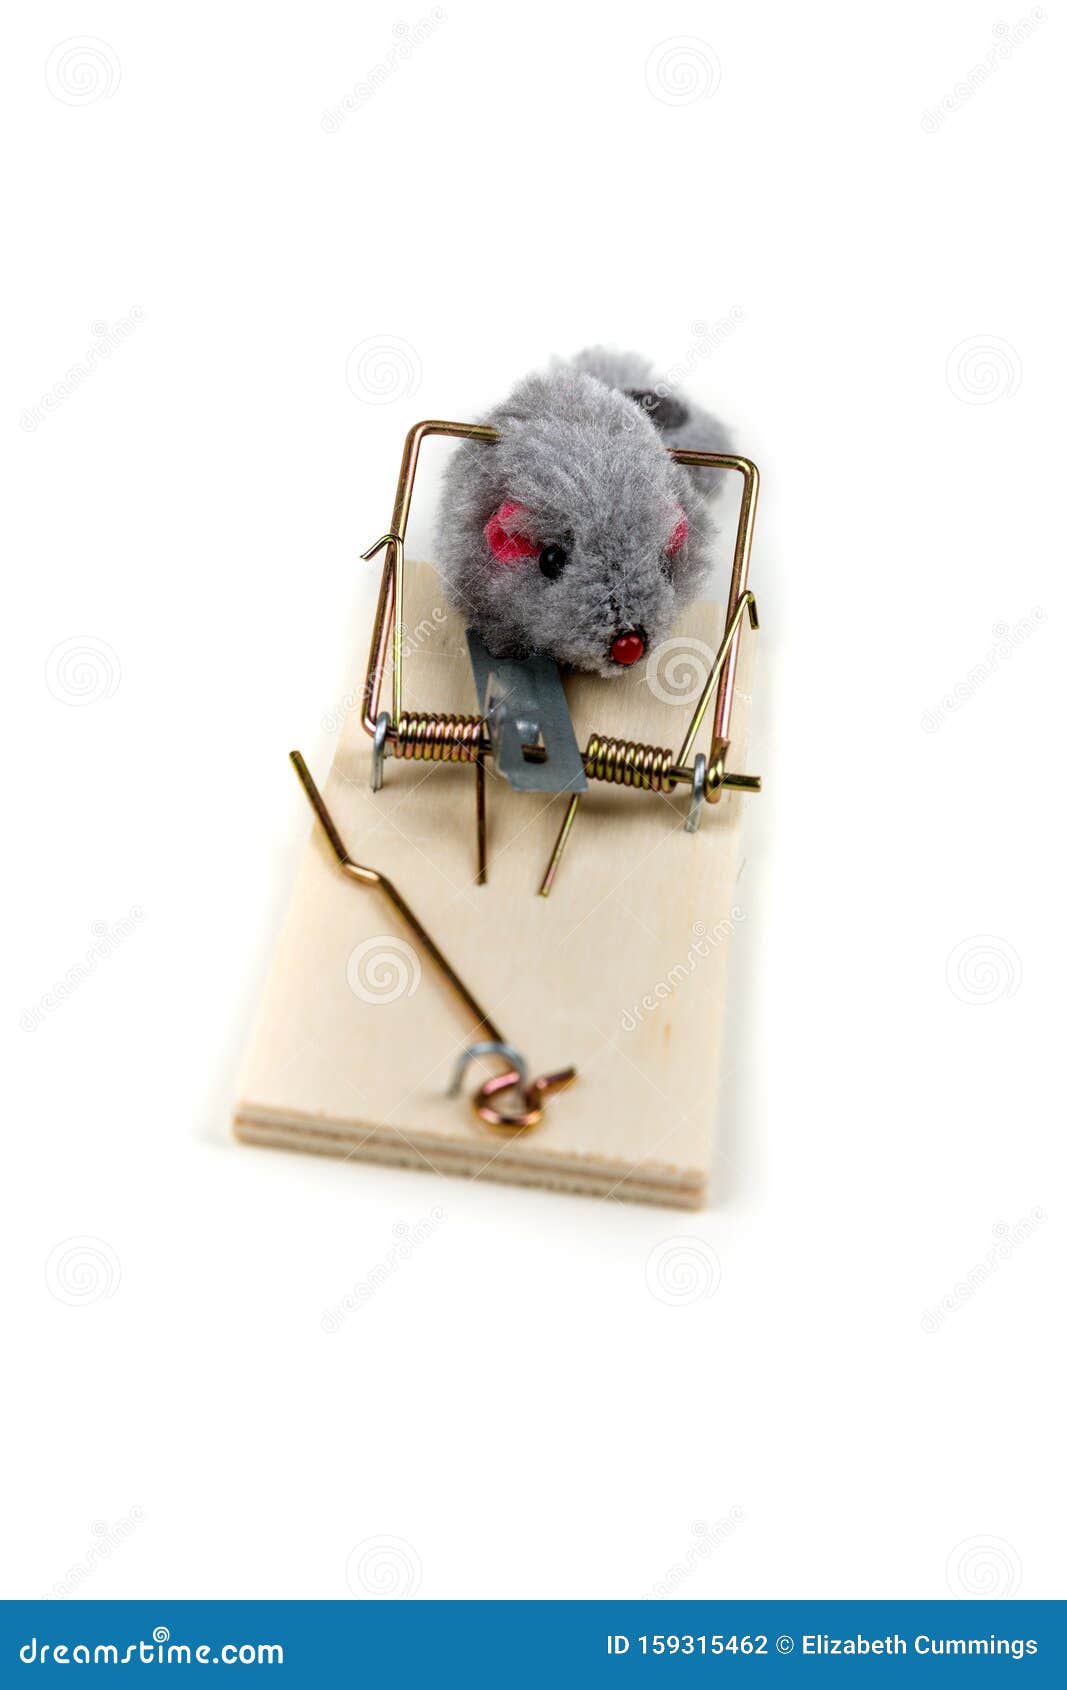 Dead mouse caught in snap trap on white background, closeup Stock